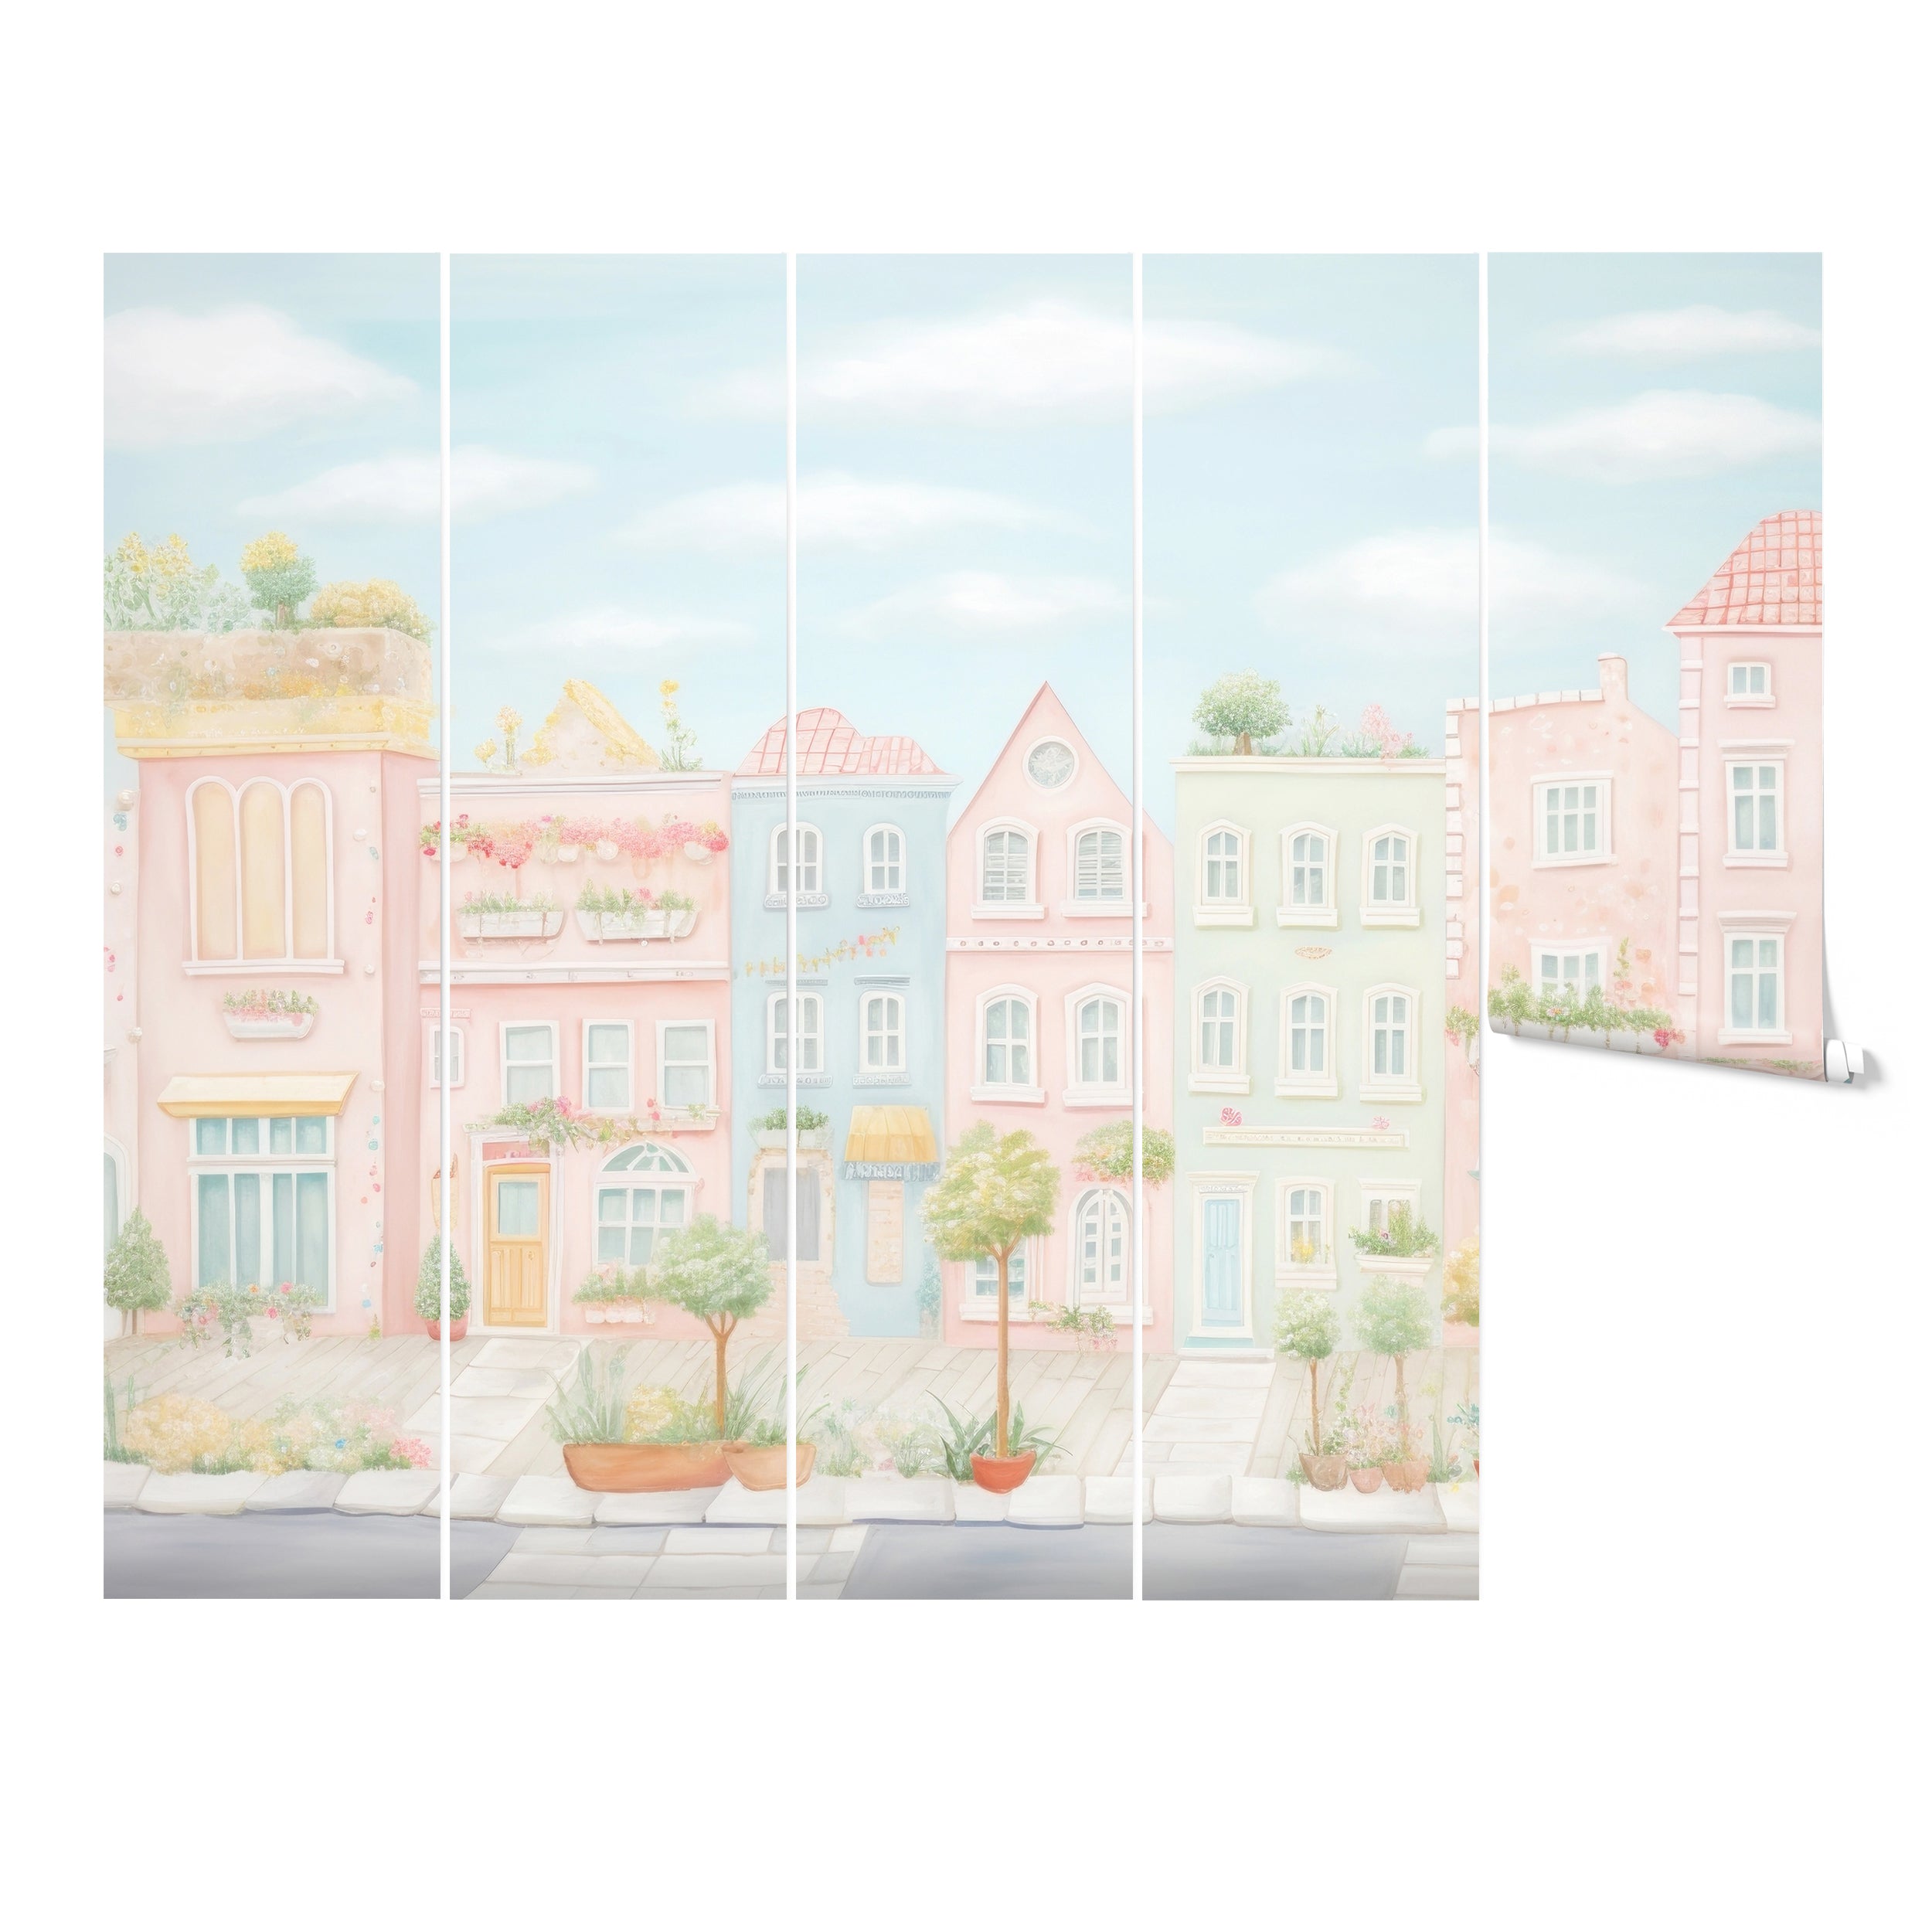 The Cinque Terre Townhouse Wallpaper shown in five separate panels, illustrating the complete design when fully applied to a wall. The wallpaper features a seamless townscape of pastel-colored houses with intricate details.